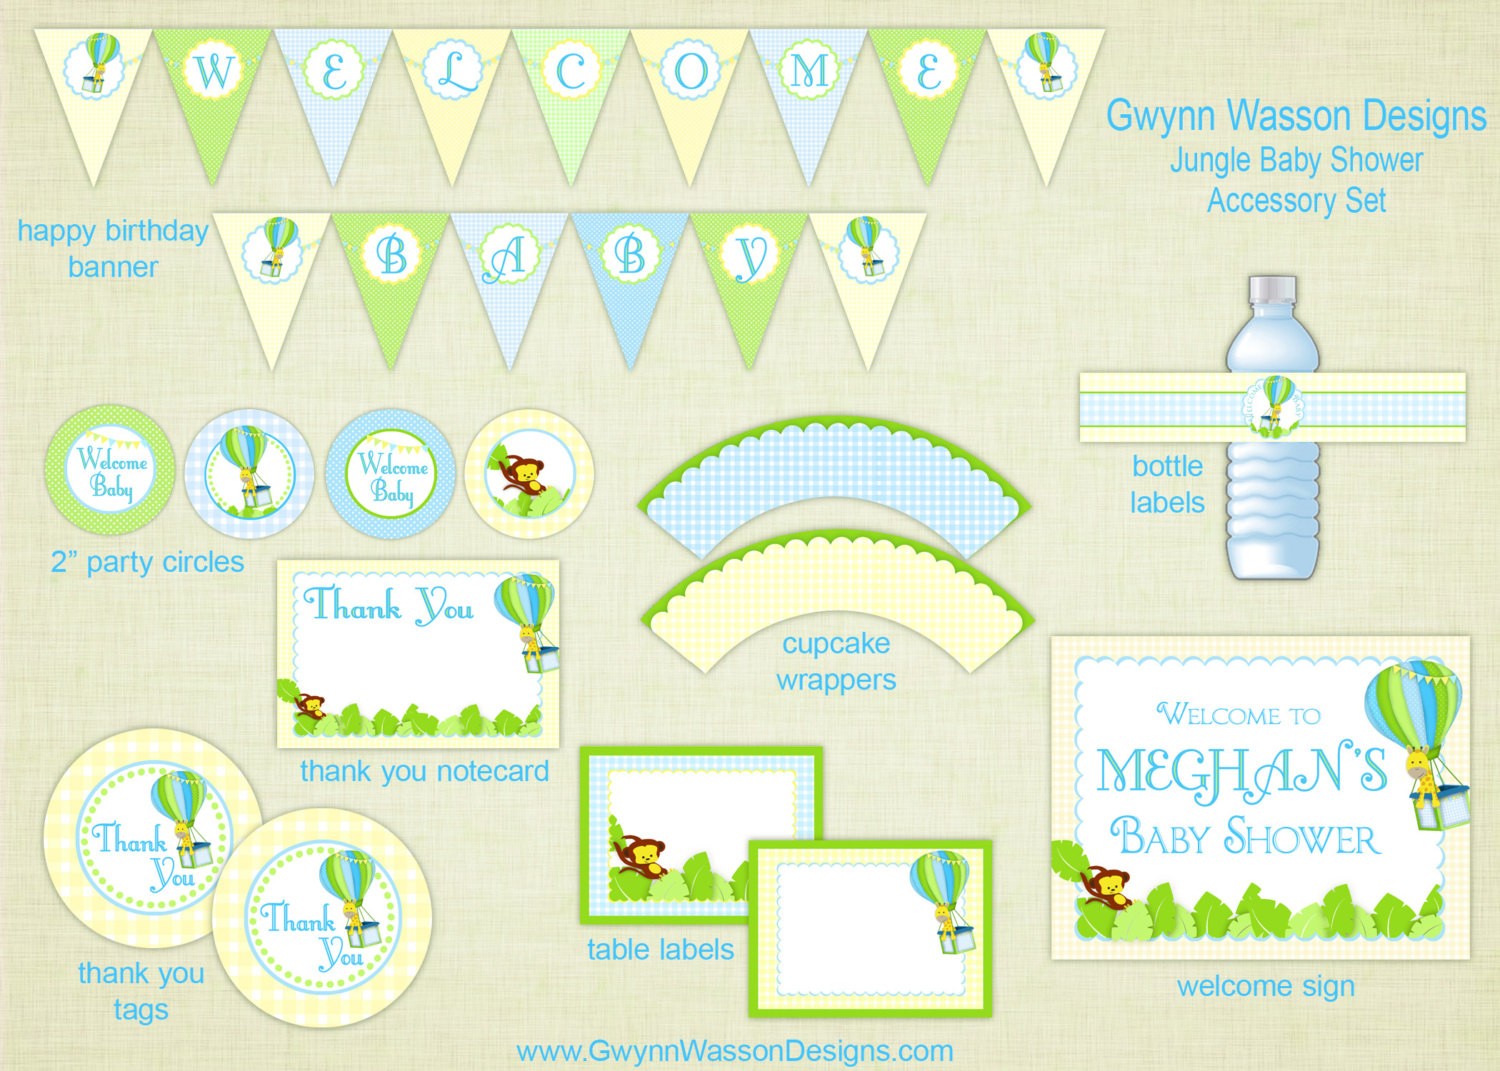 Free Printables For Baby Shower Decorations - Baby Shower Ideas - Free Printable Baby Shower Decorations For A Boy